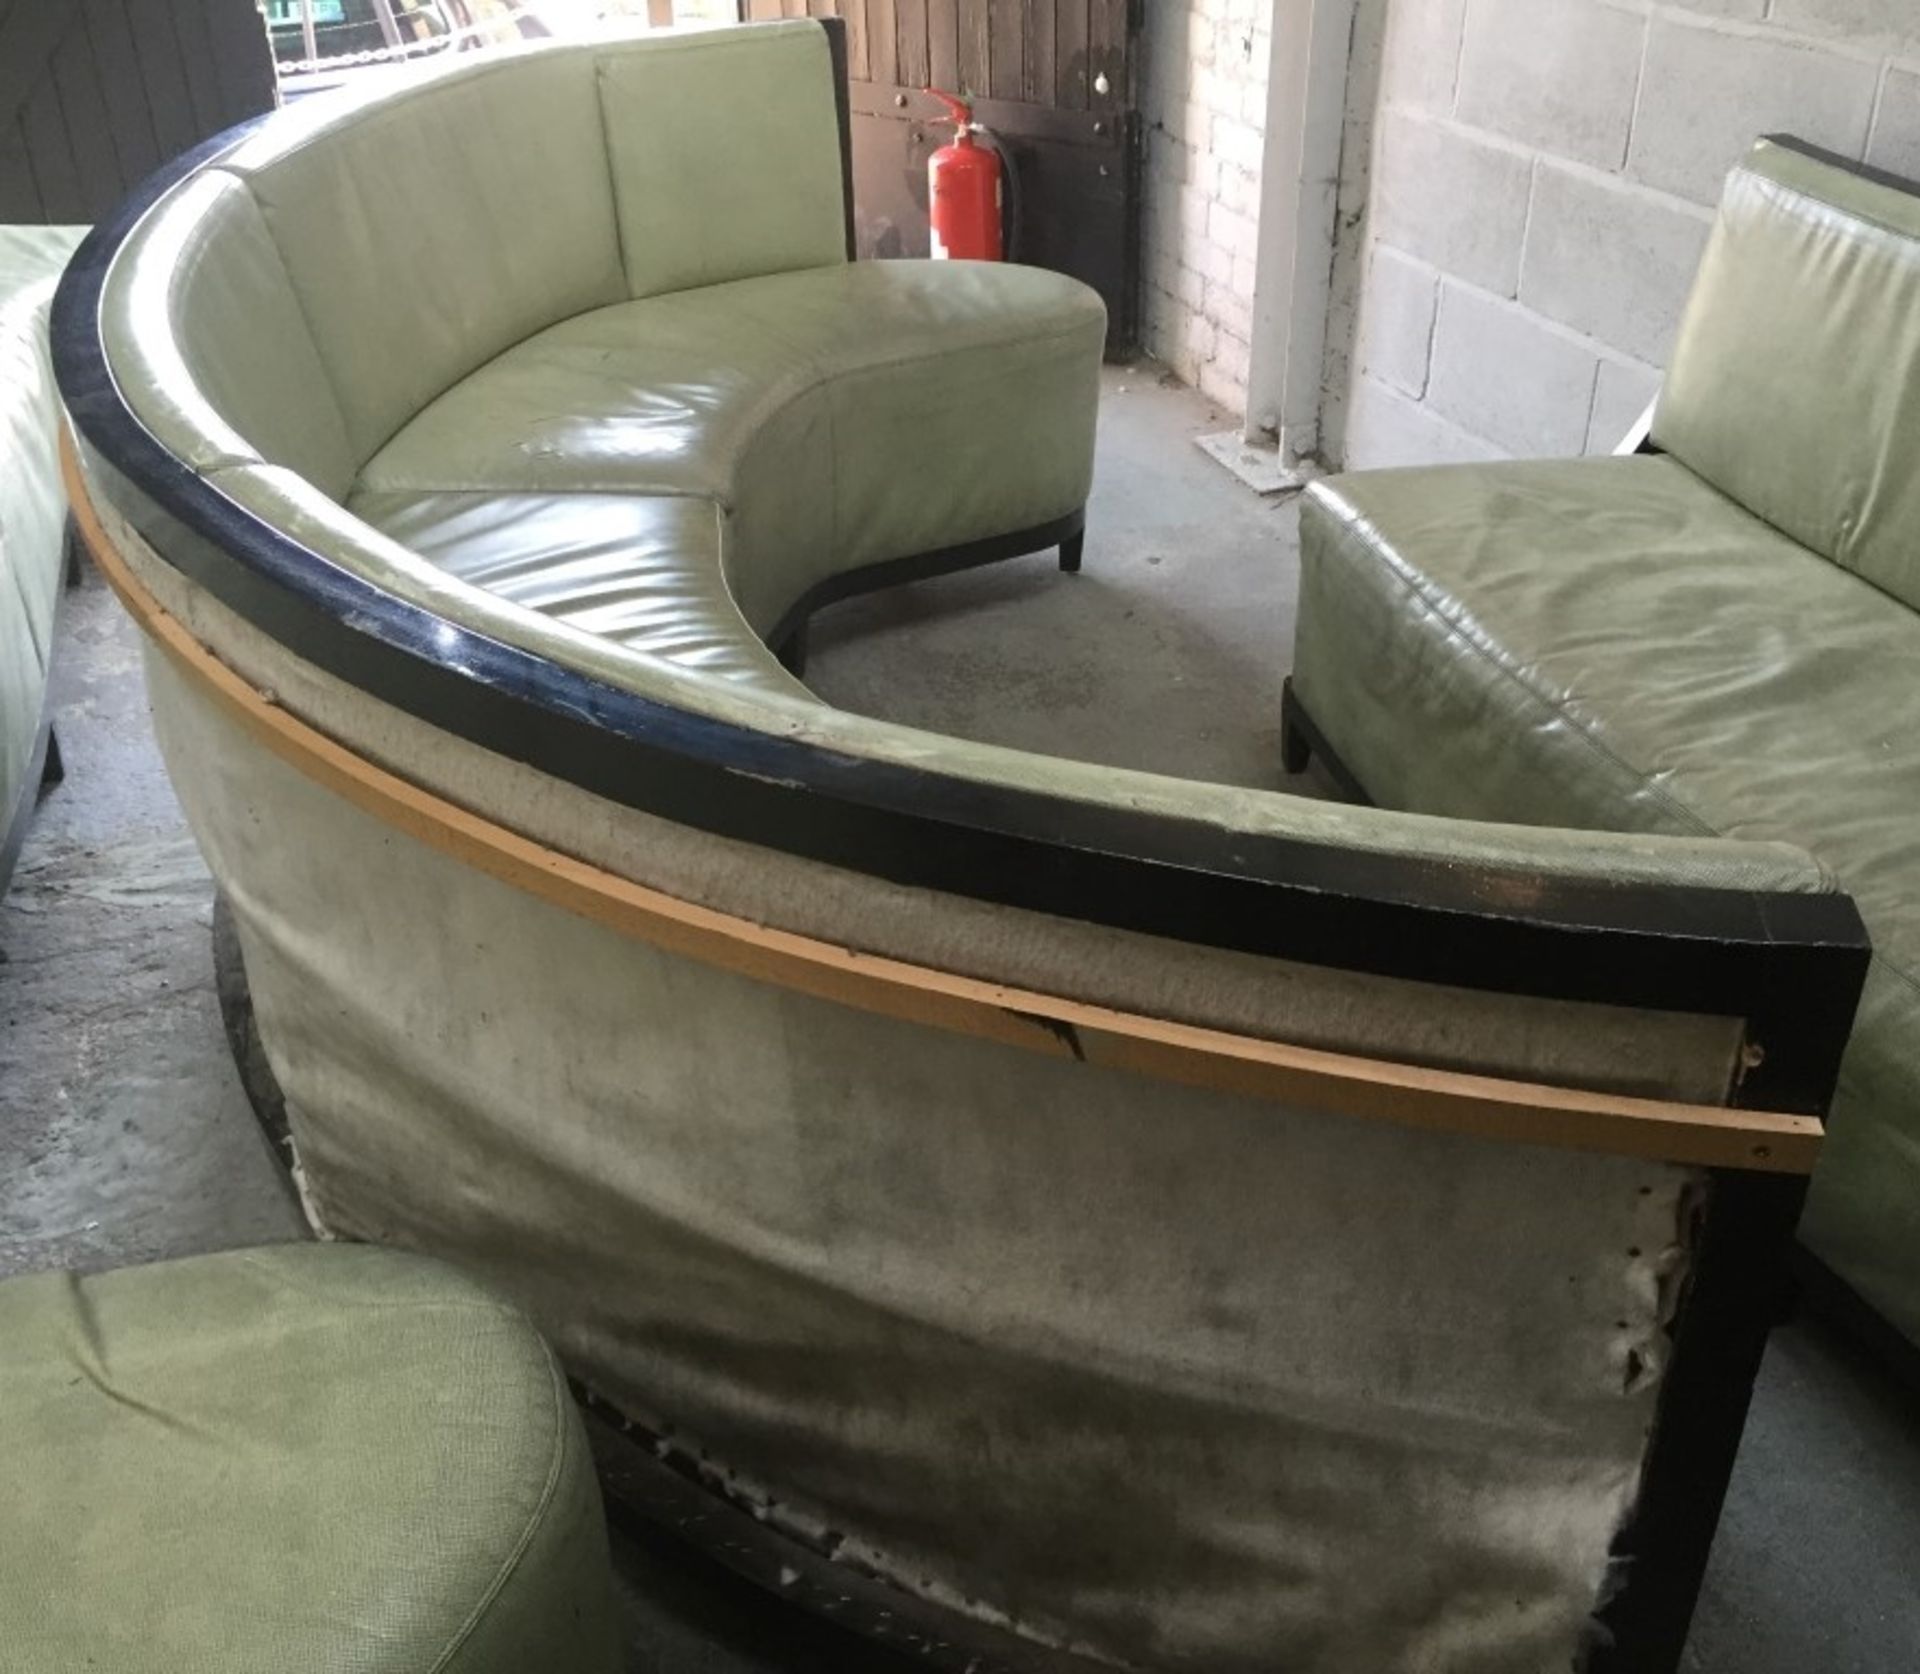 1 x Luxury Upholstered Curved Seating Area - Recently Removed From Nobu - Dimensions: W285 x D62cm x - Image 9 of 23